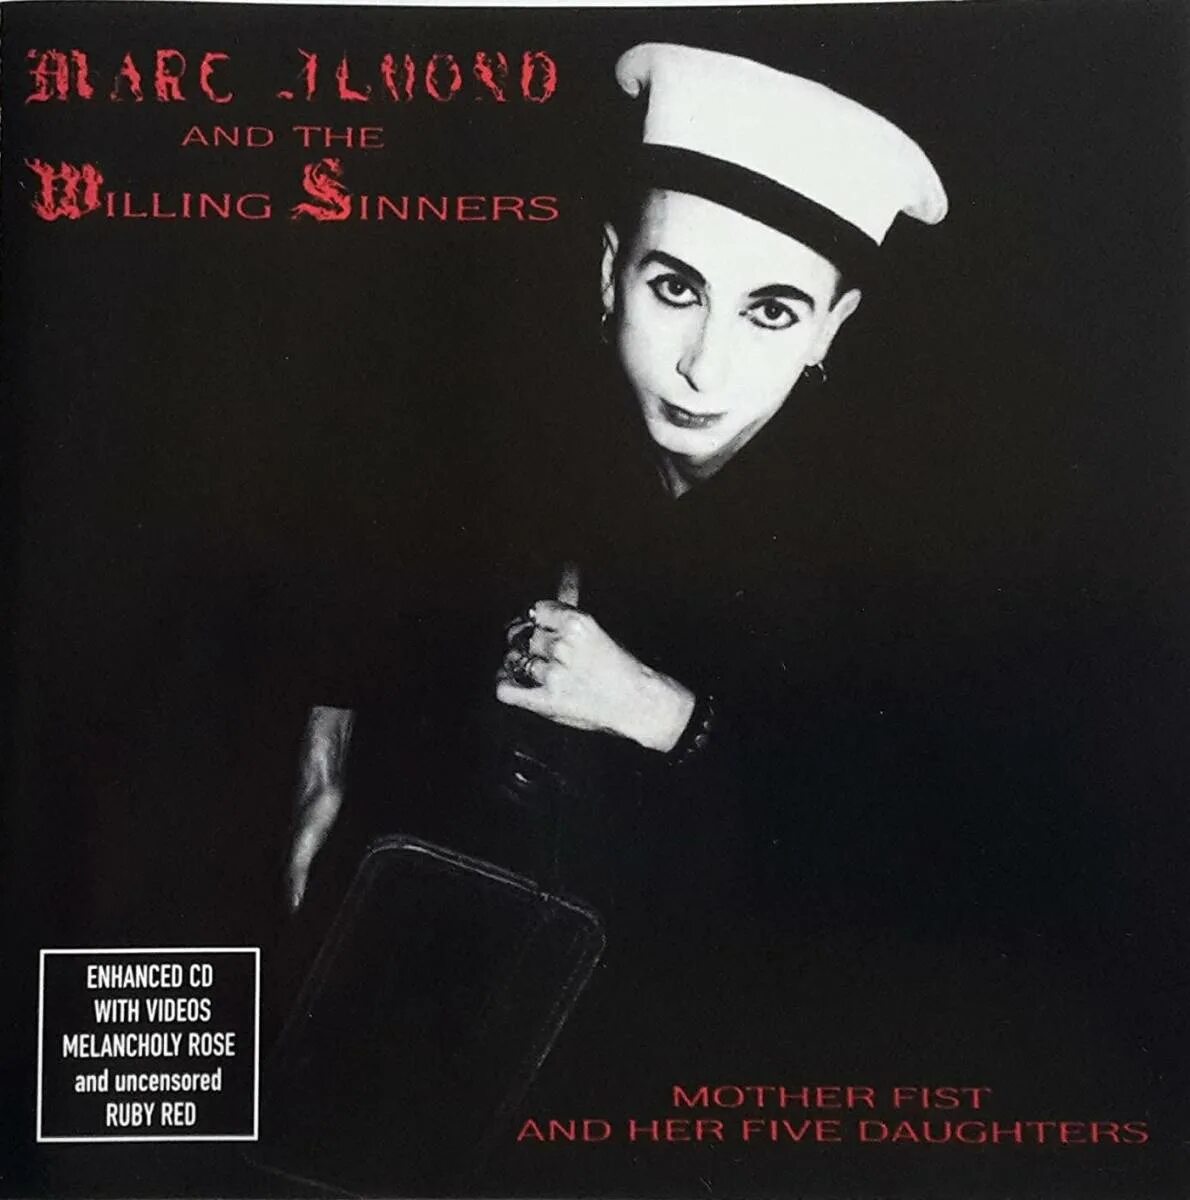 Marc Almond - mother fist and her Five daughters. Marc Almond the willing Sinner. Marc Almond & the willing Sinners - mother fist. Five daughters